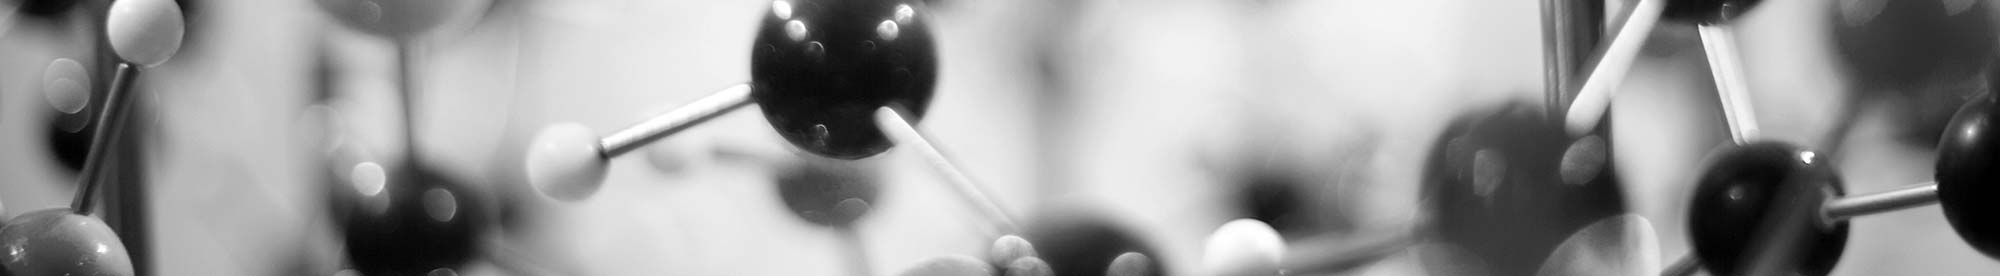 condensia-quimica-passion-for-chemistry-header